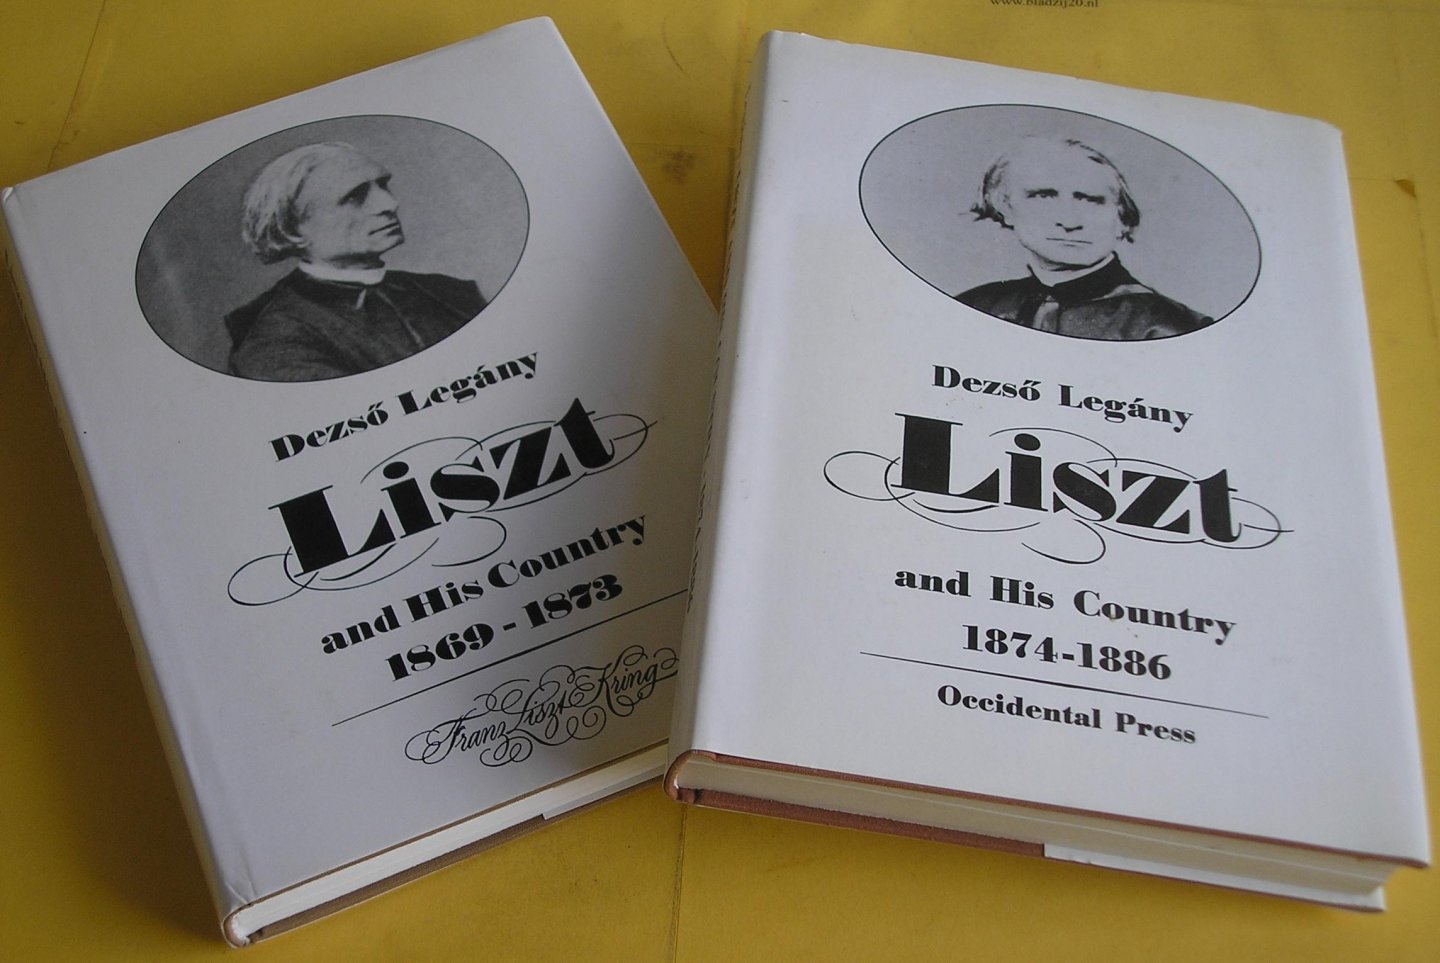 Legany, Dezso. - Liszt and his country 1869-1873.